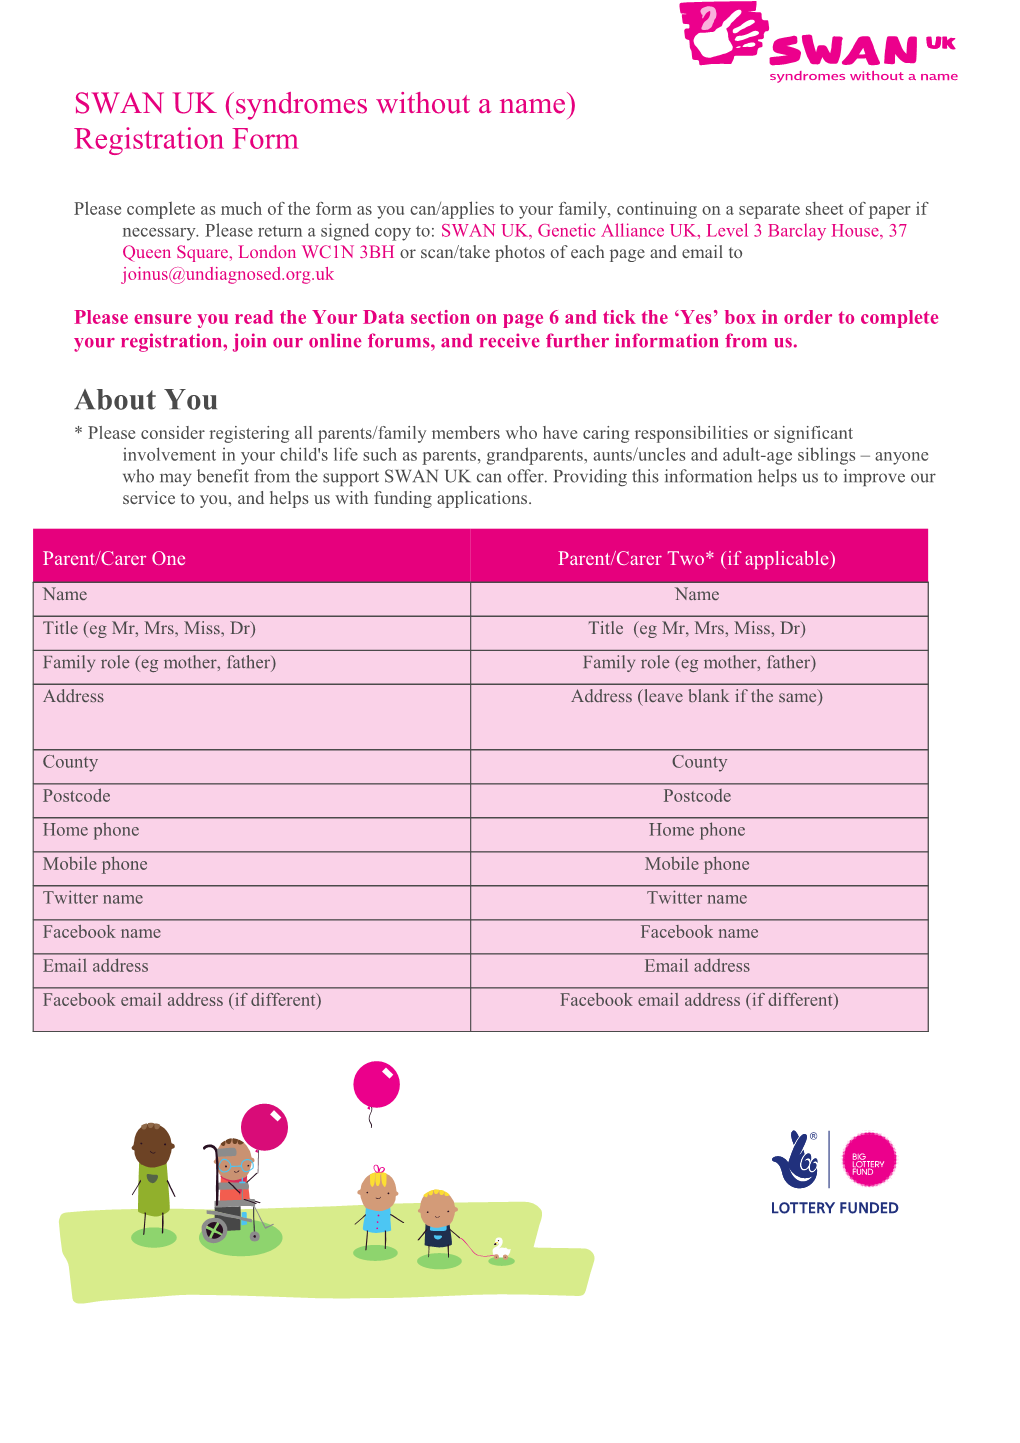 SWAN UK (Syndromes Without a Name) Registration Form